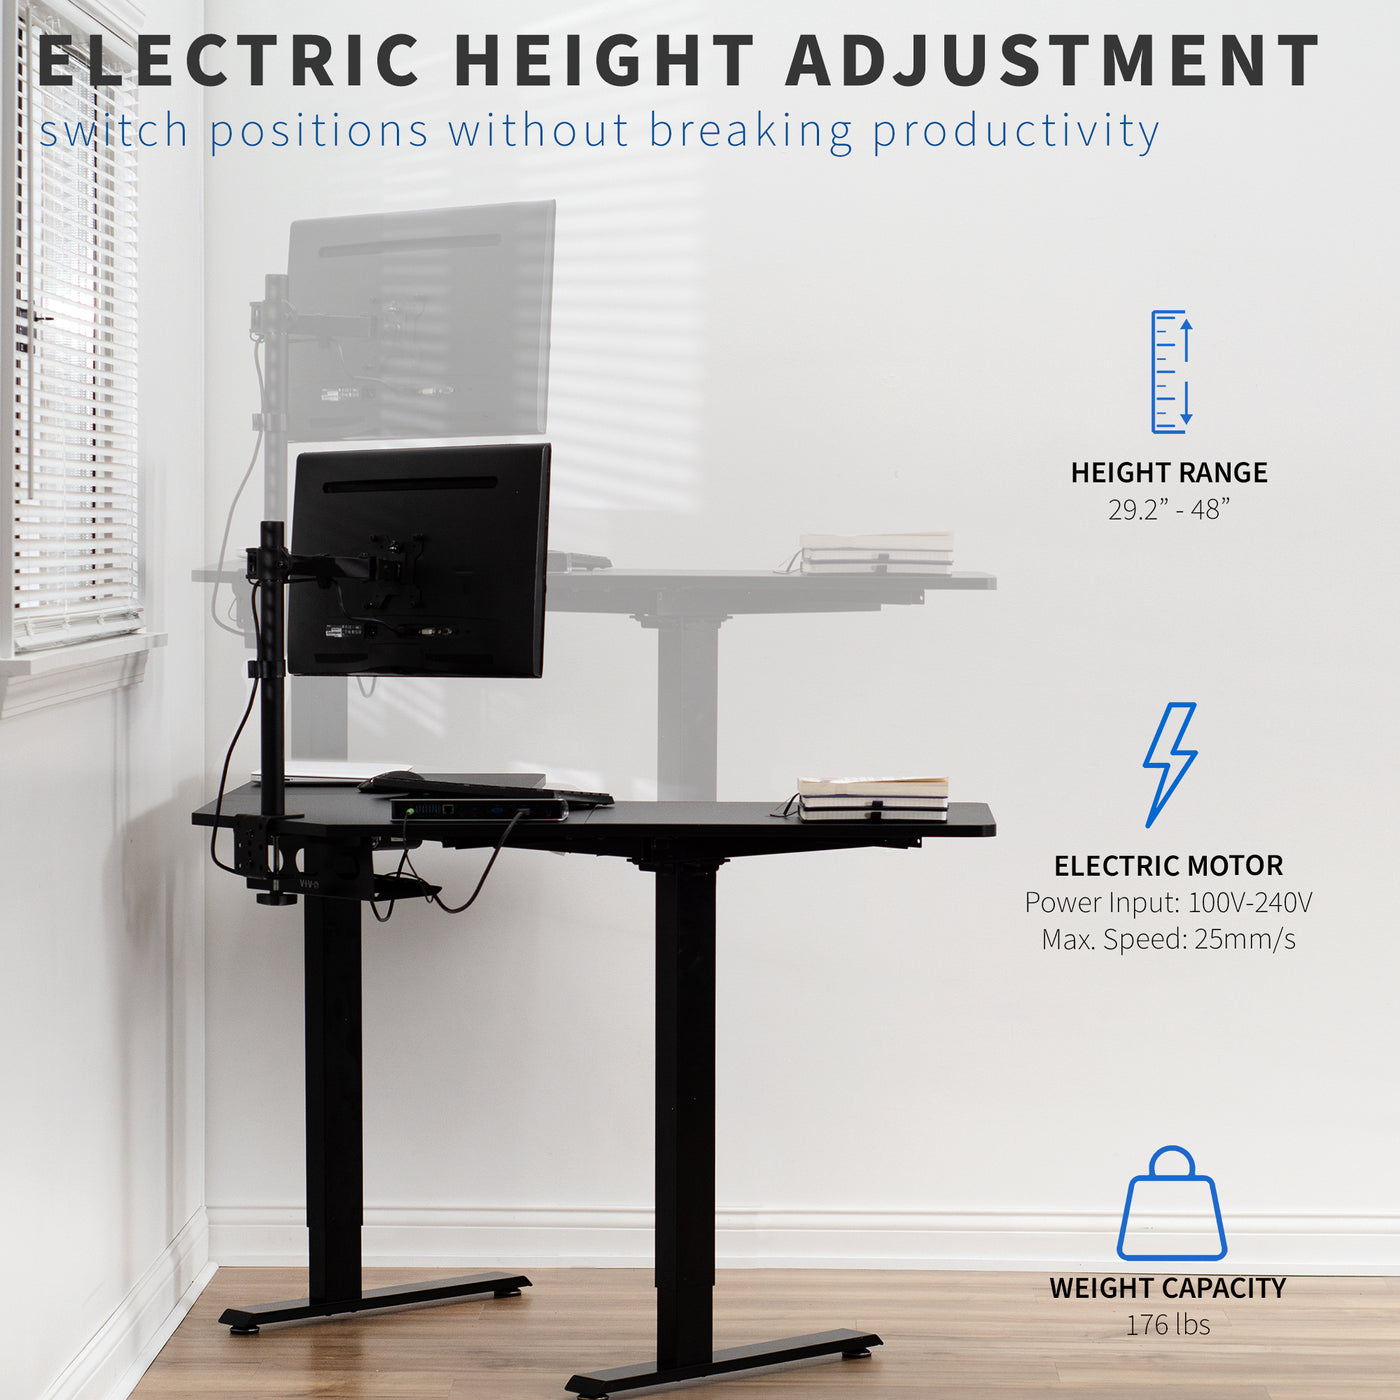 Adjust the height of the workstation without breaking productivity at a height-adjustable desk.